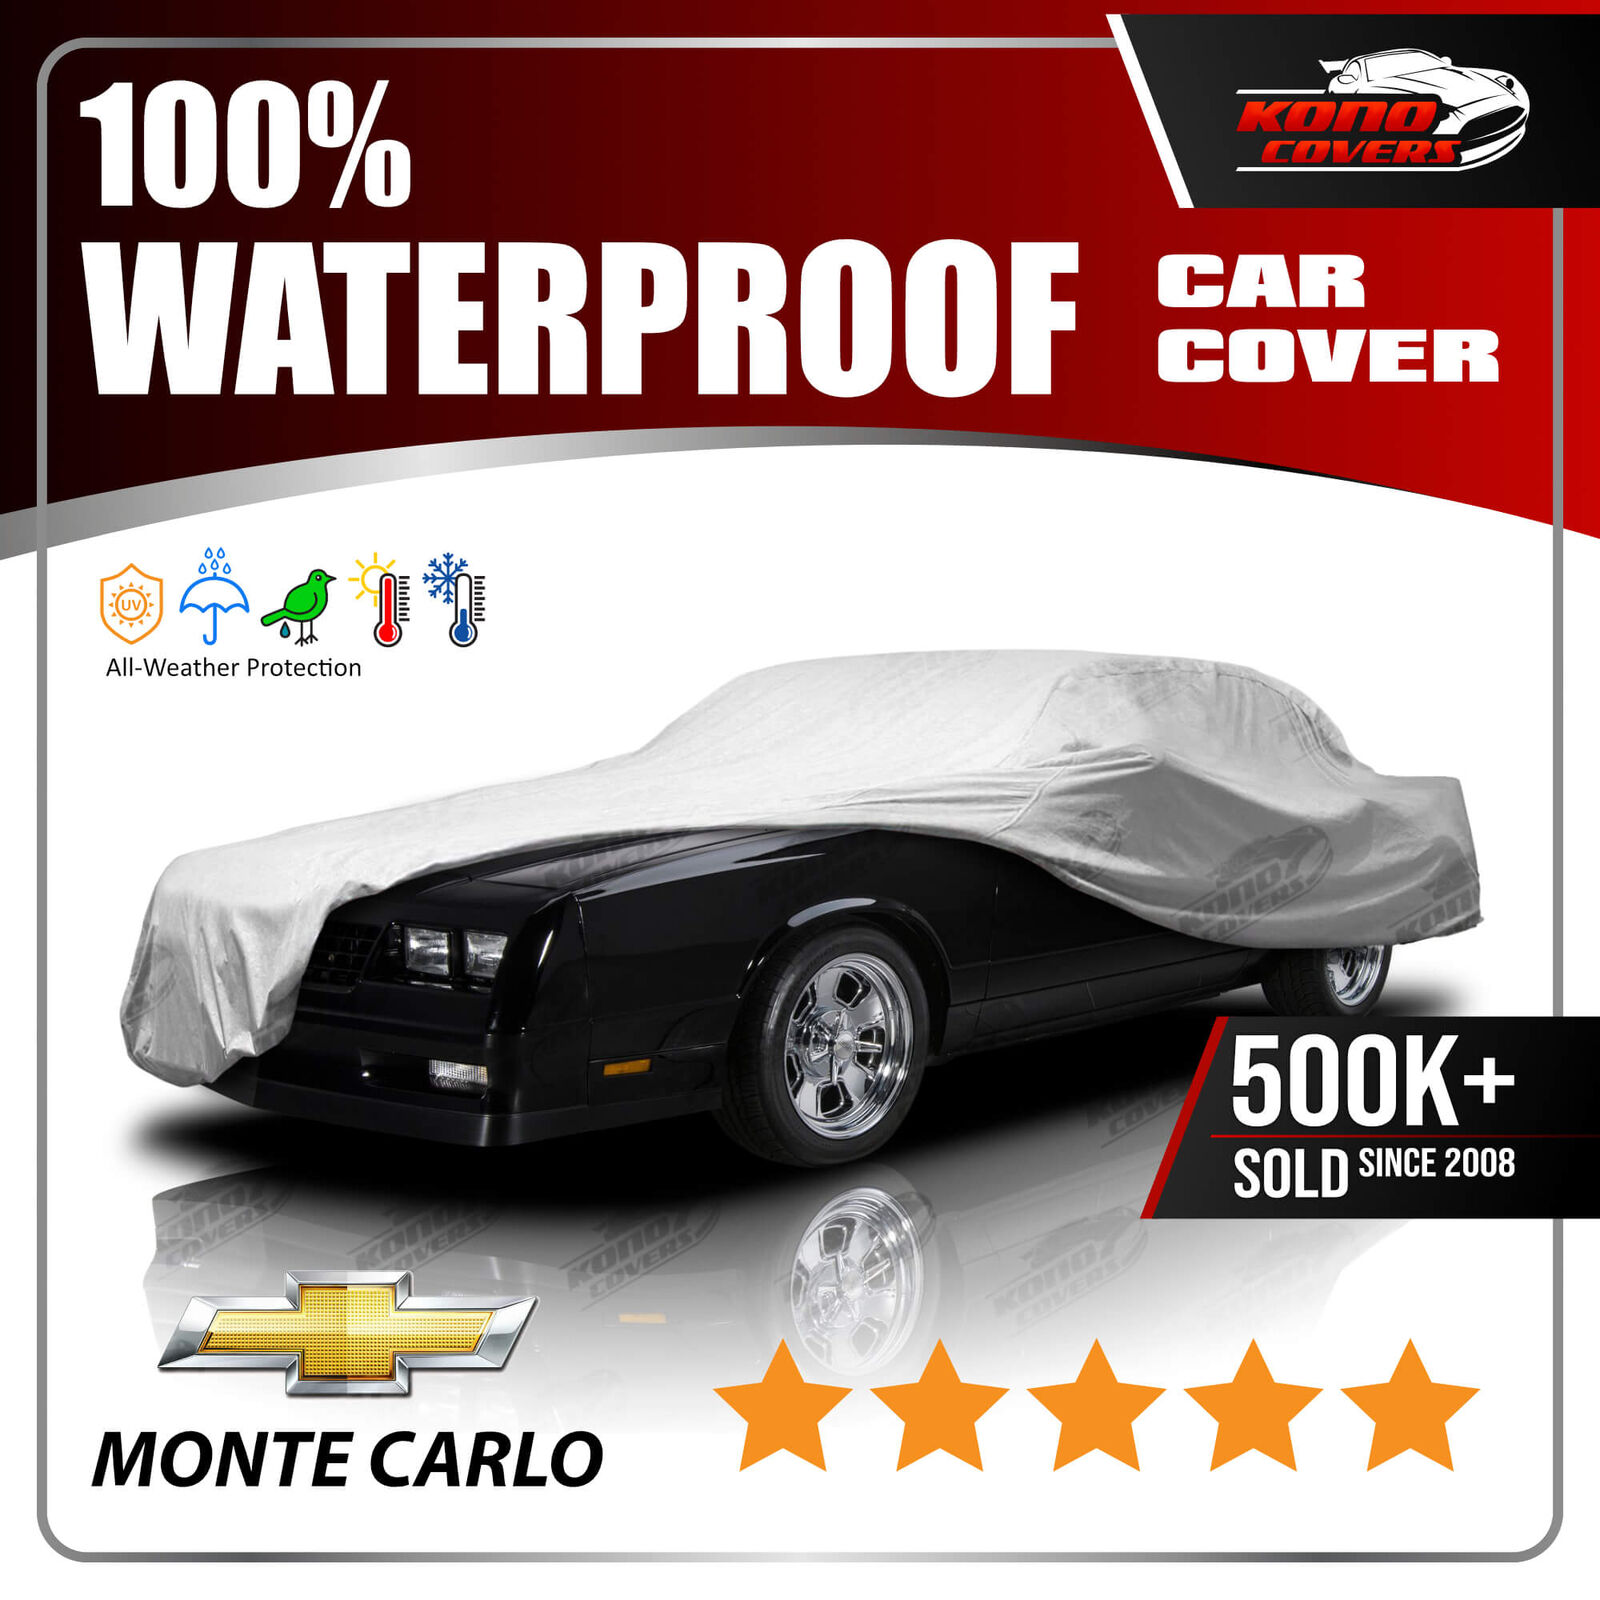 CHEVY MONTE CARLO 1981-1988 CAR COVER - 100% Waterproof 100% Breathable